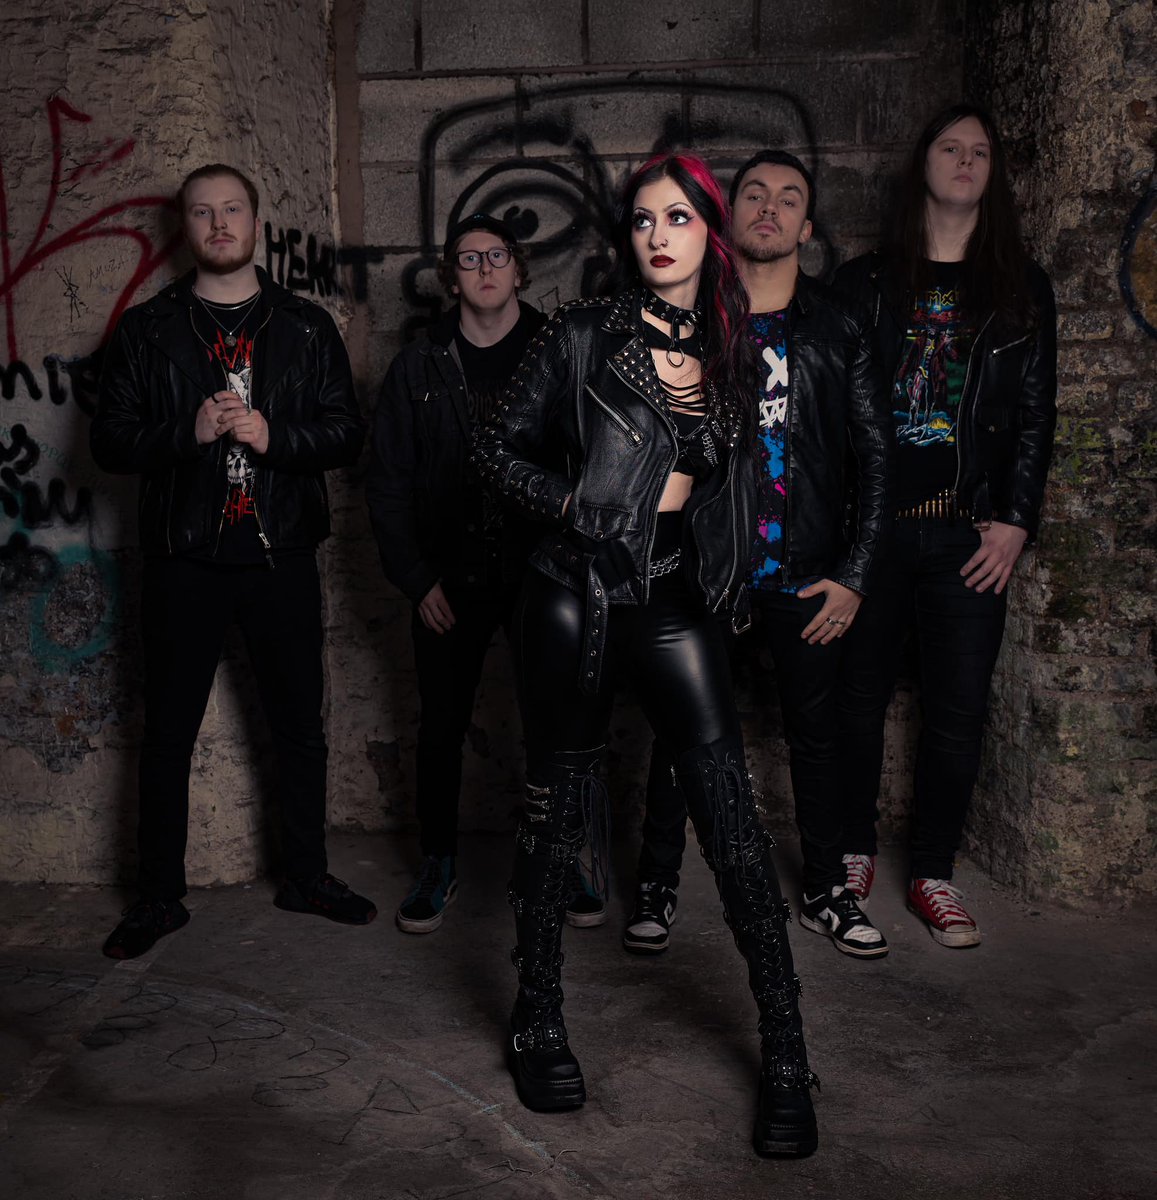 WAILING BANSHEE (Heavy Metal - UK) - Released their new single 'To Save The World' from their upcoming EP 'Fight To Be Free' #wailingbanshee #heavymetal wp.me/p9NC0l-hZa